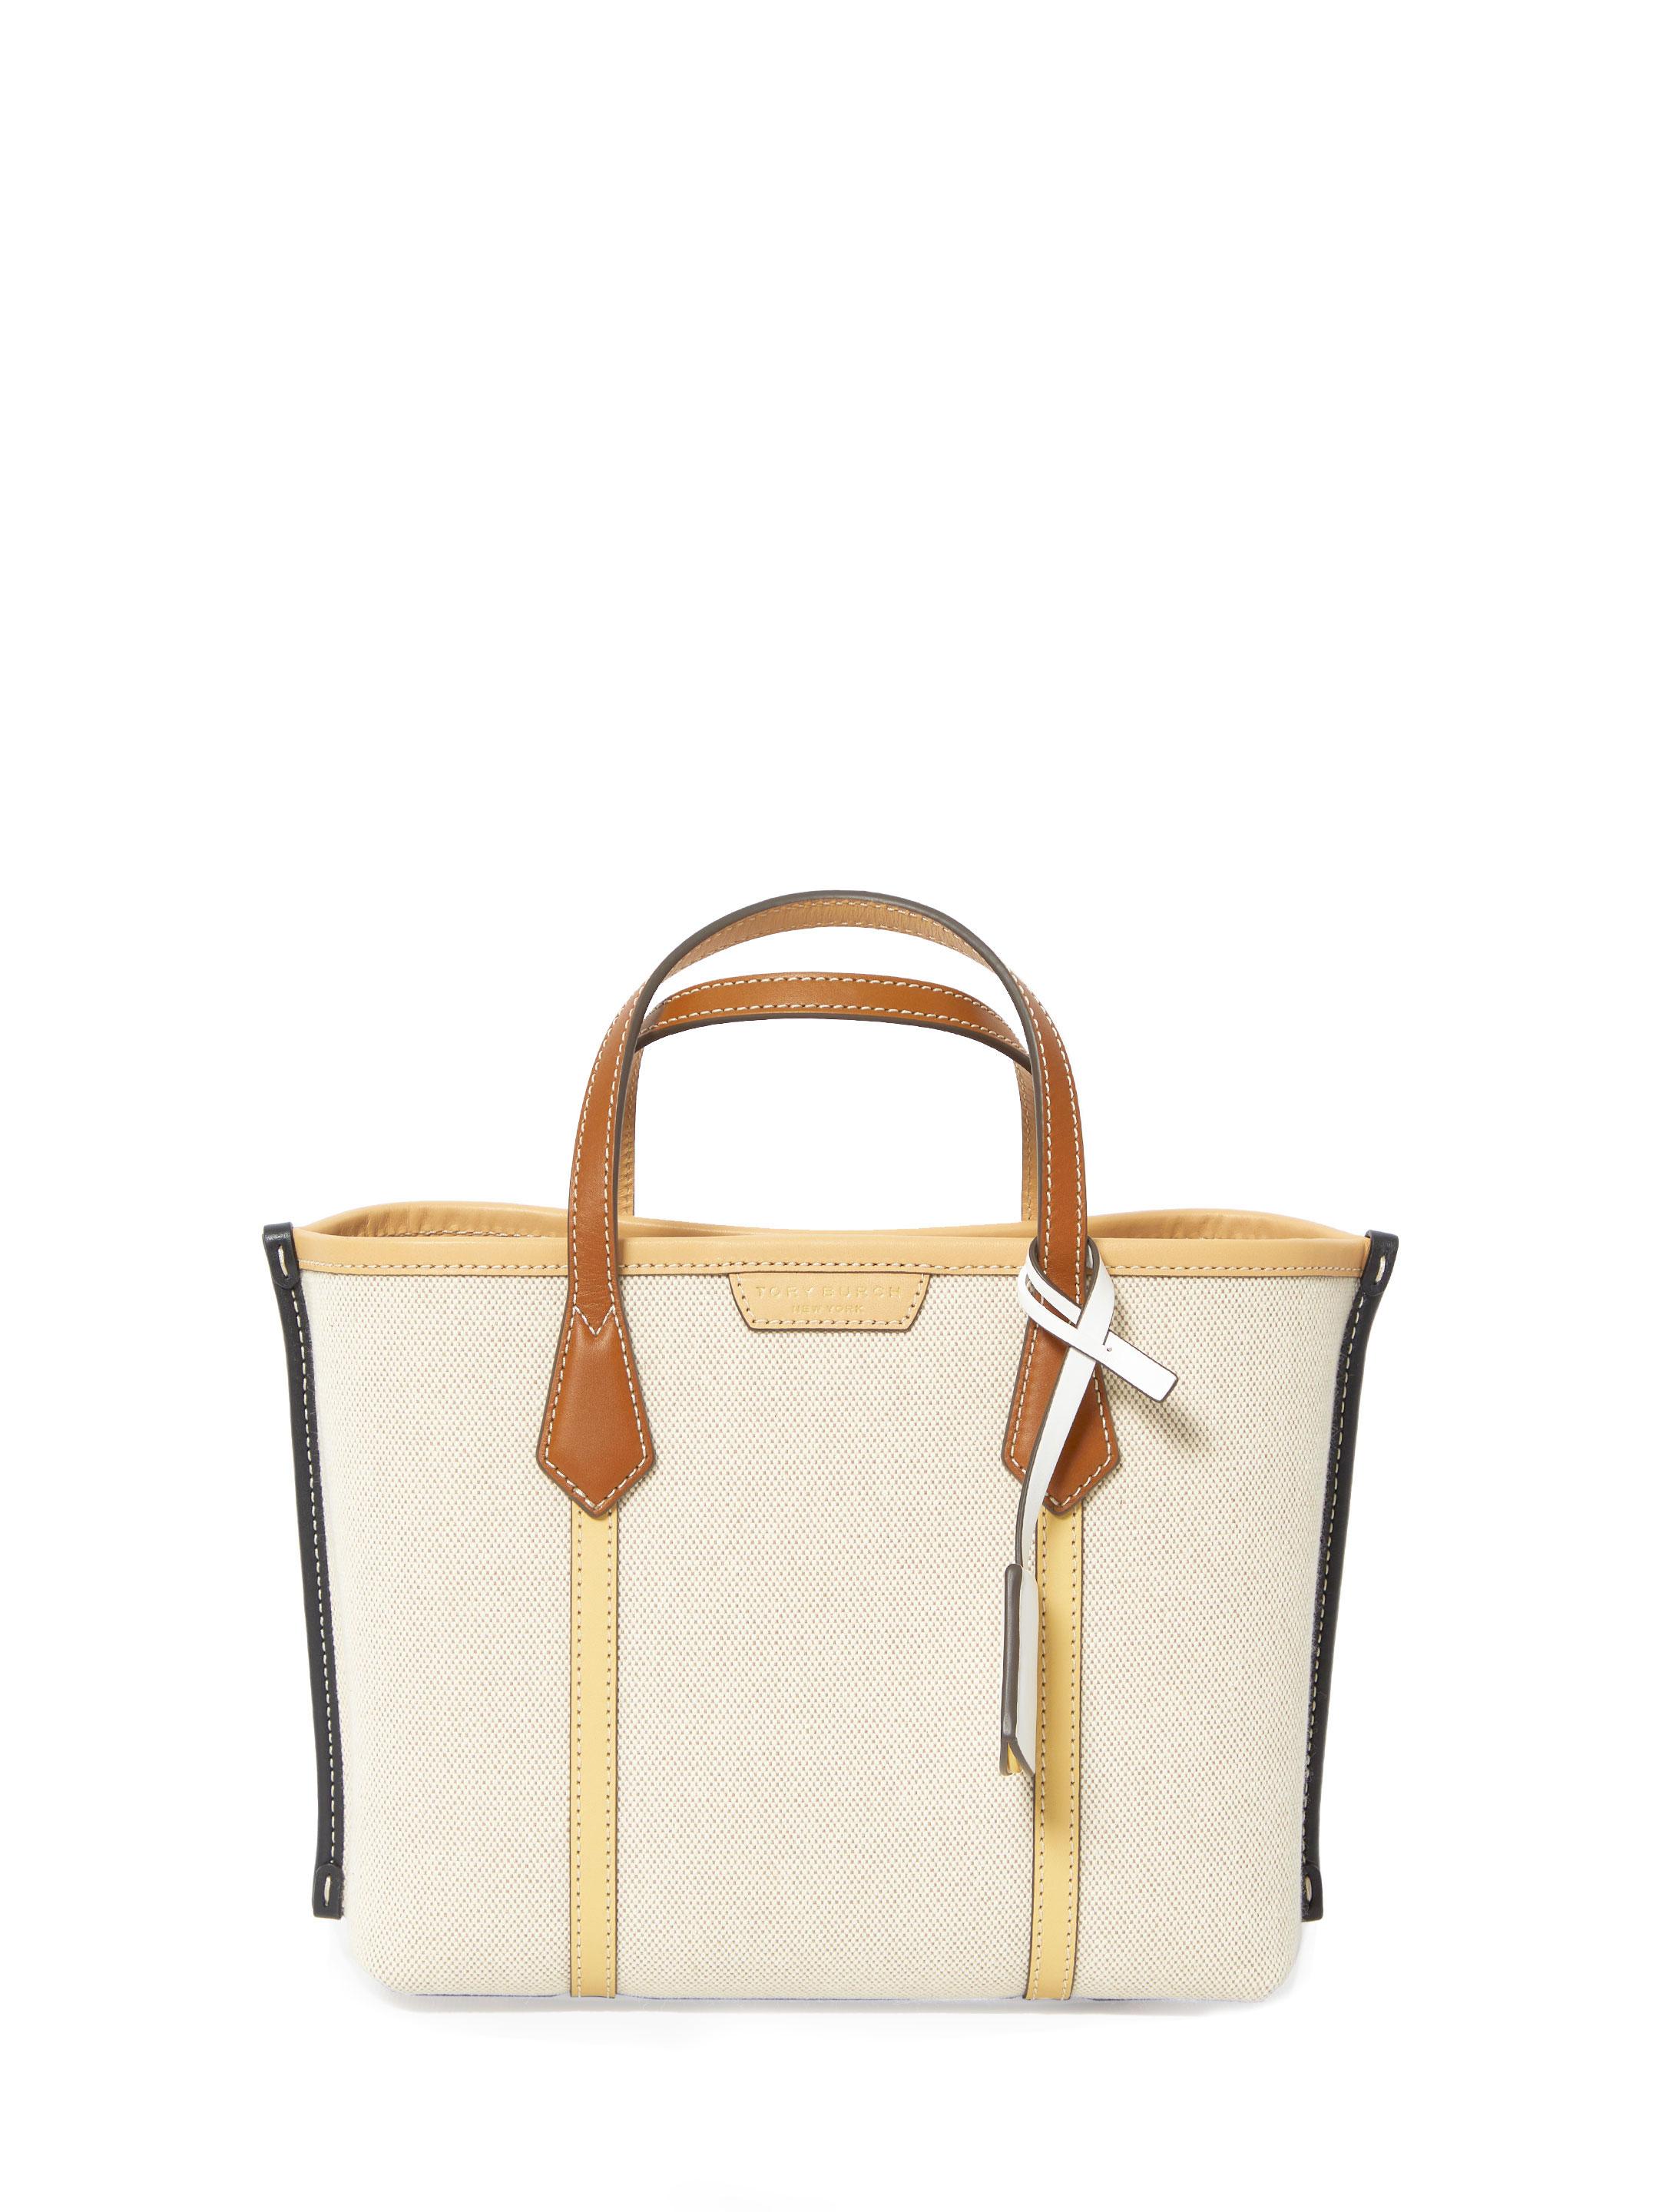 Tory Burch Small Perry Canvas Tote Bag in Natural | Lyst